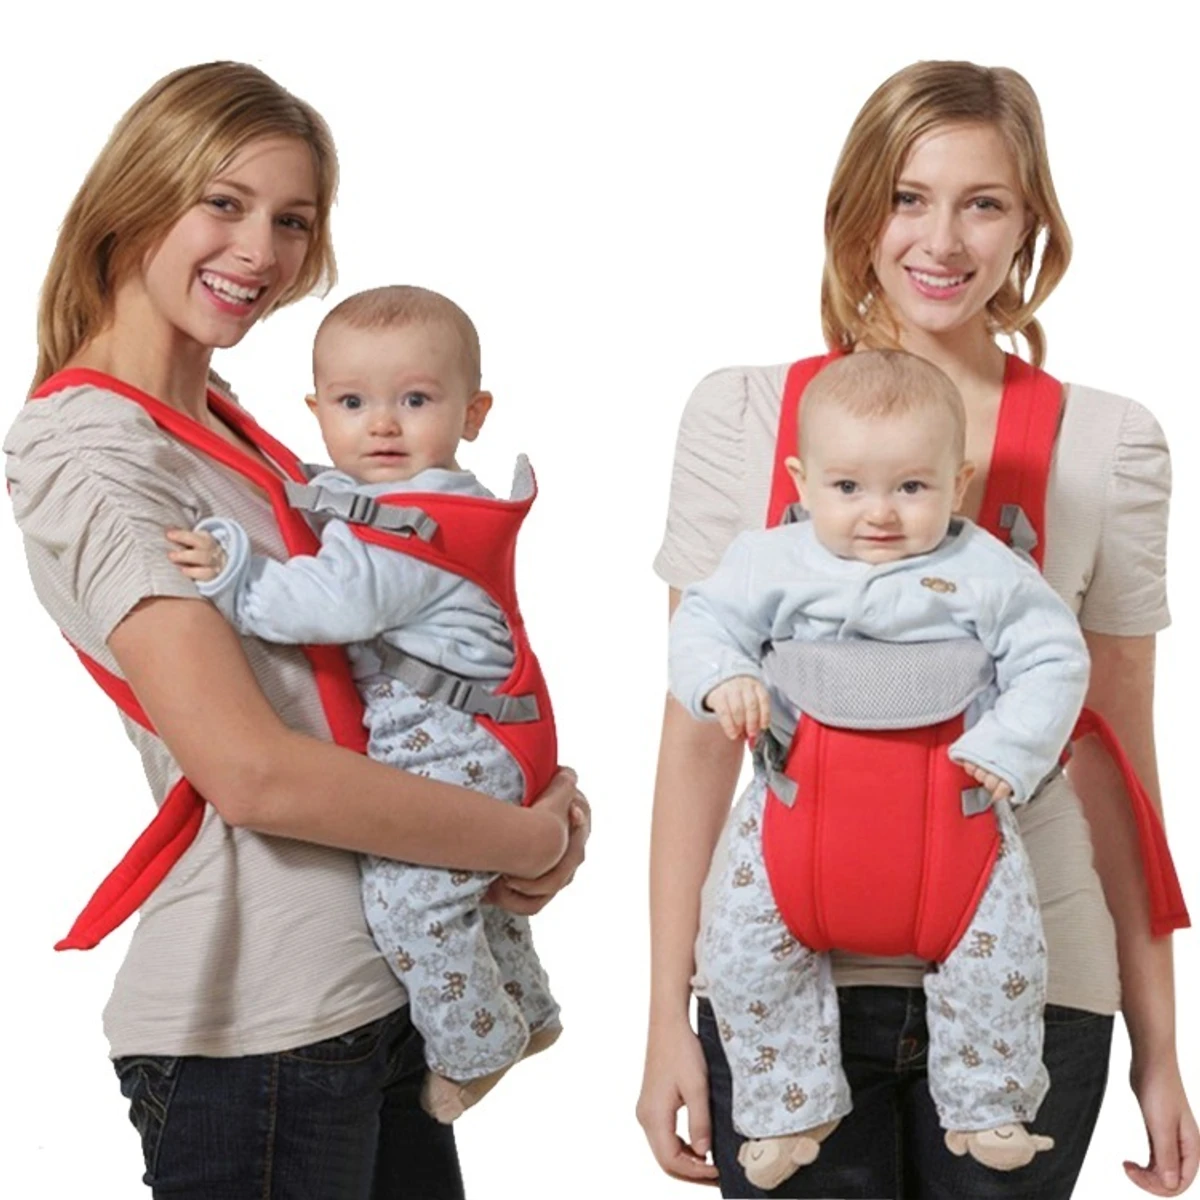 Baby carrier bag